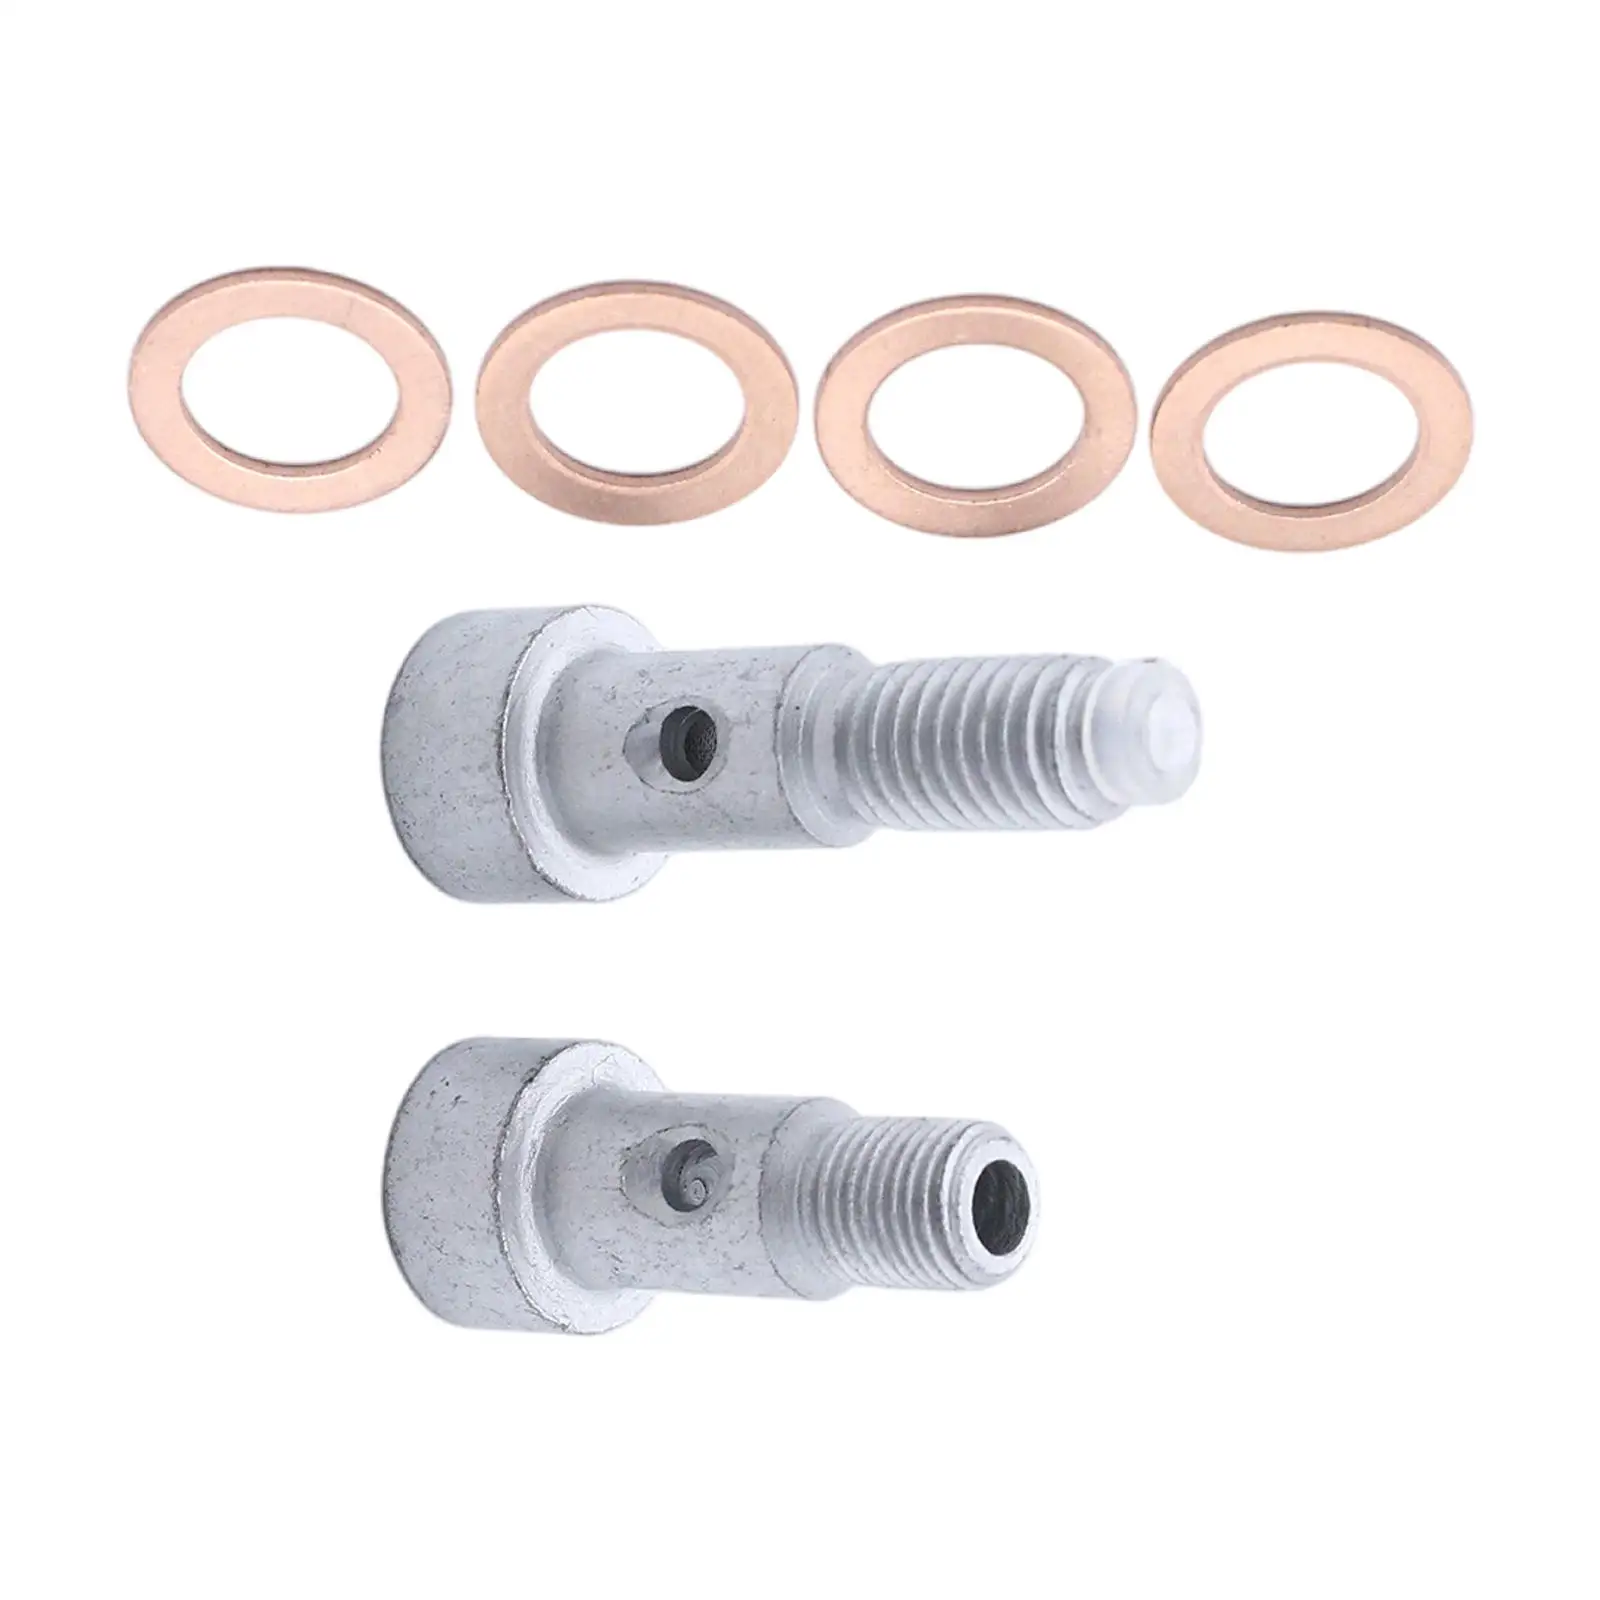 Turbo Fitting Washers Short and Long Bolts Kit fits for Peugeot, Professional